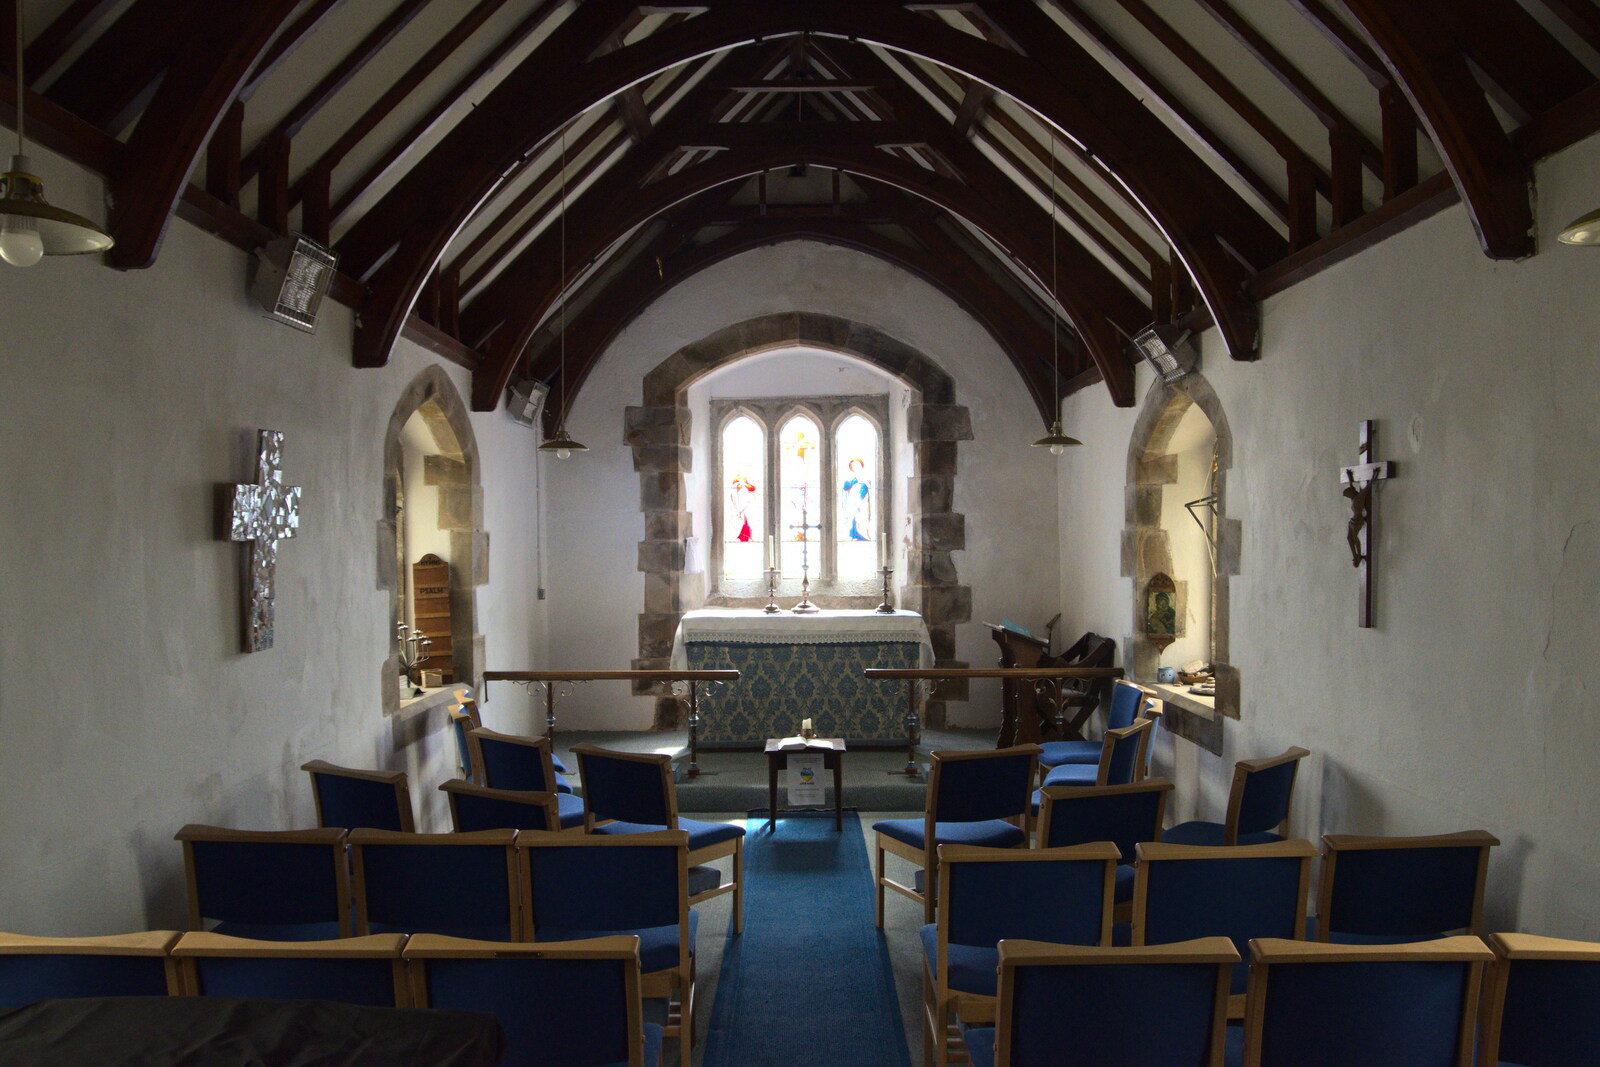 The cute little chapel of St. Mary's from Easter in South Zeal and Moretonhampstead, Devon - 9th April